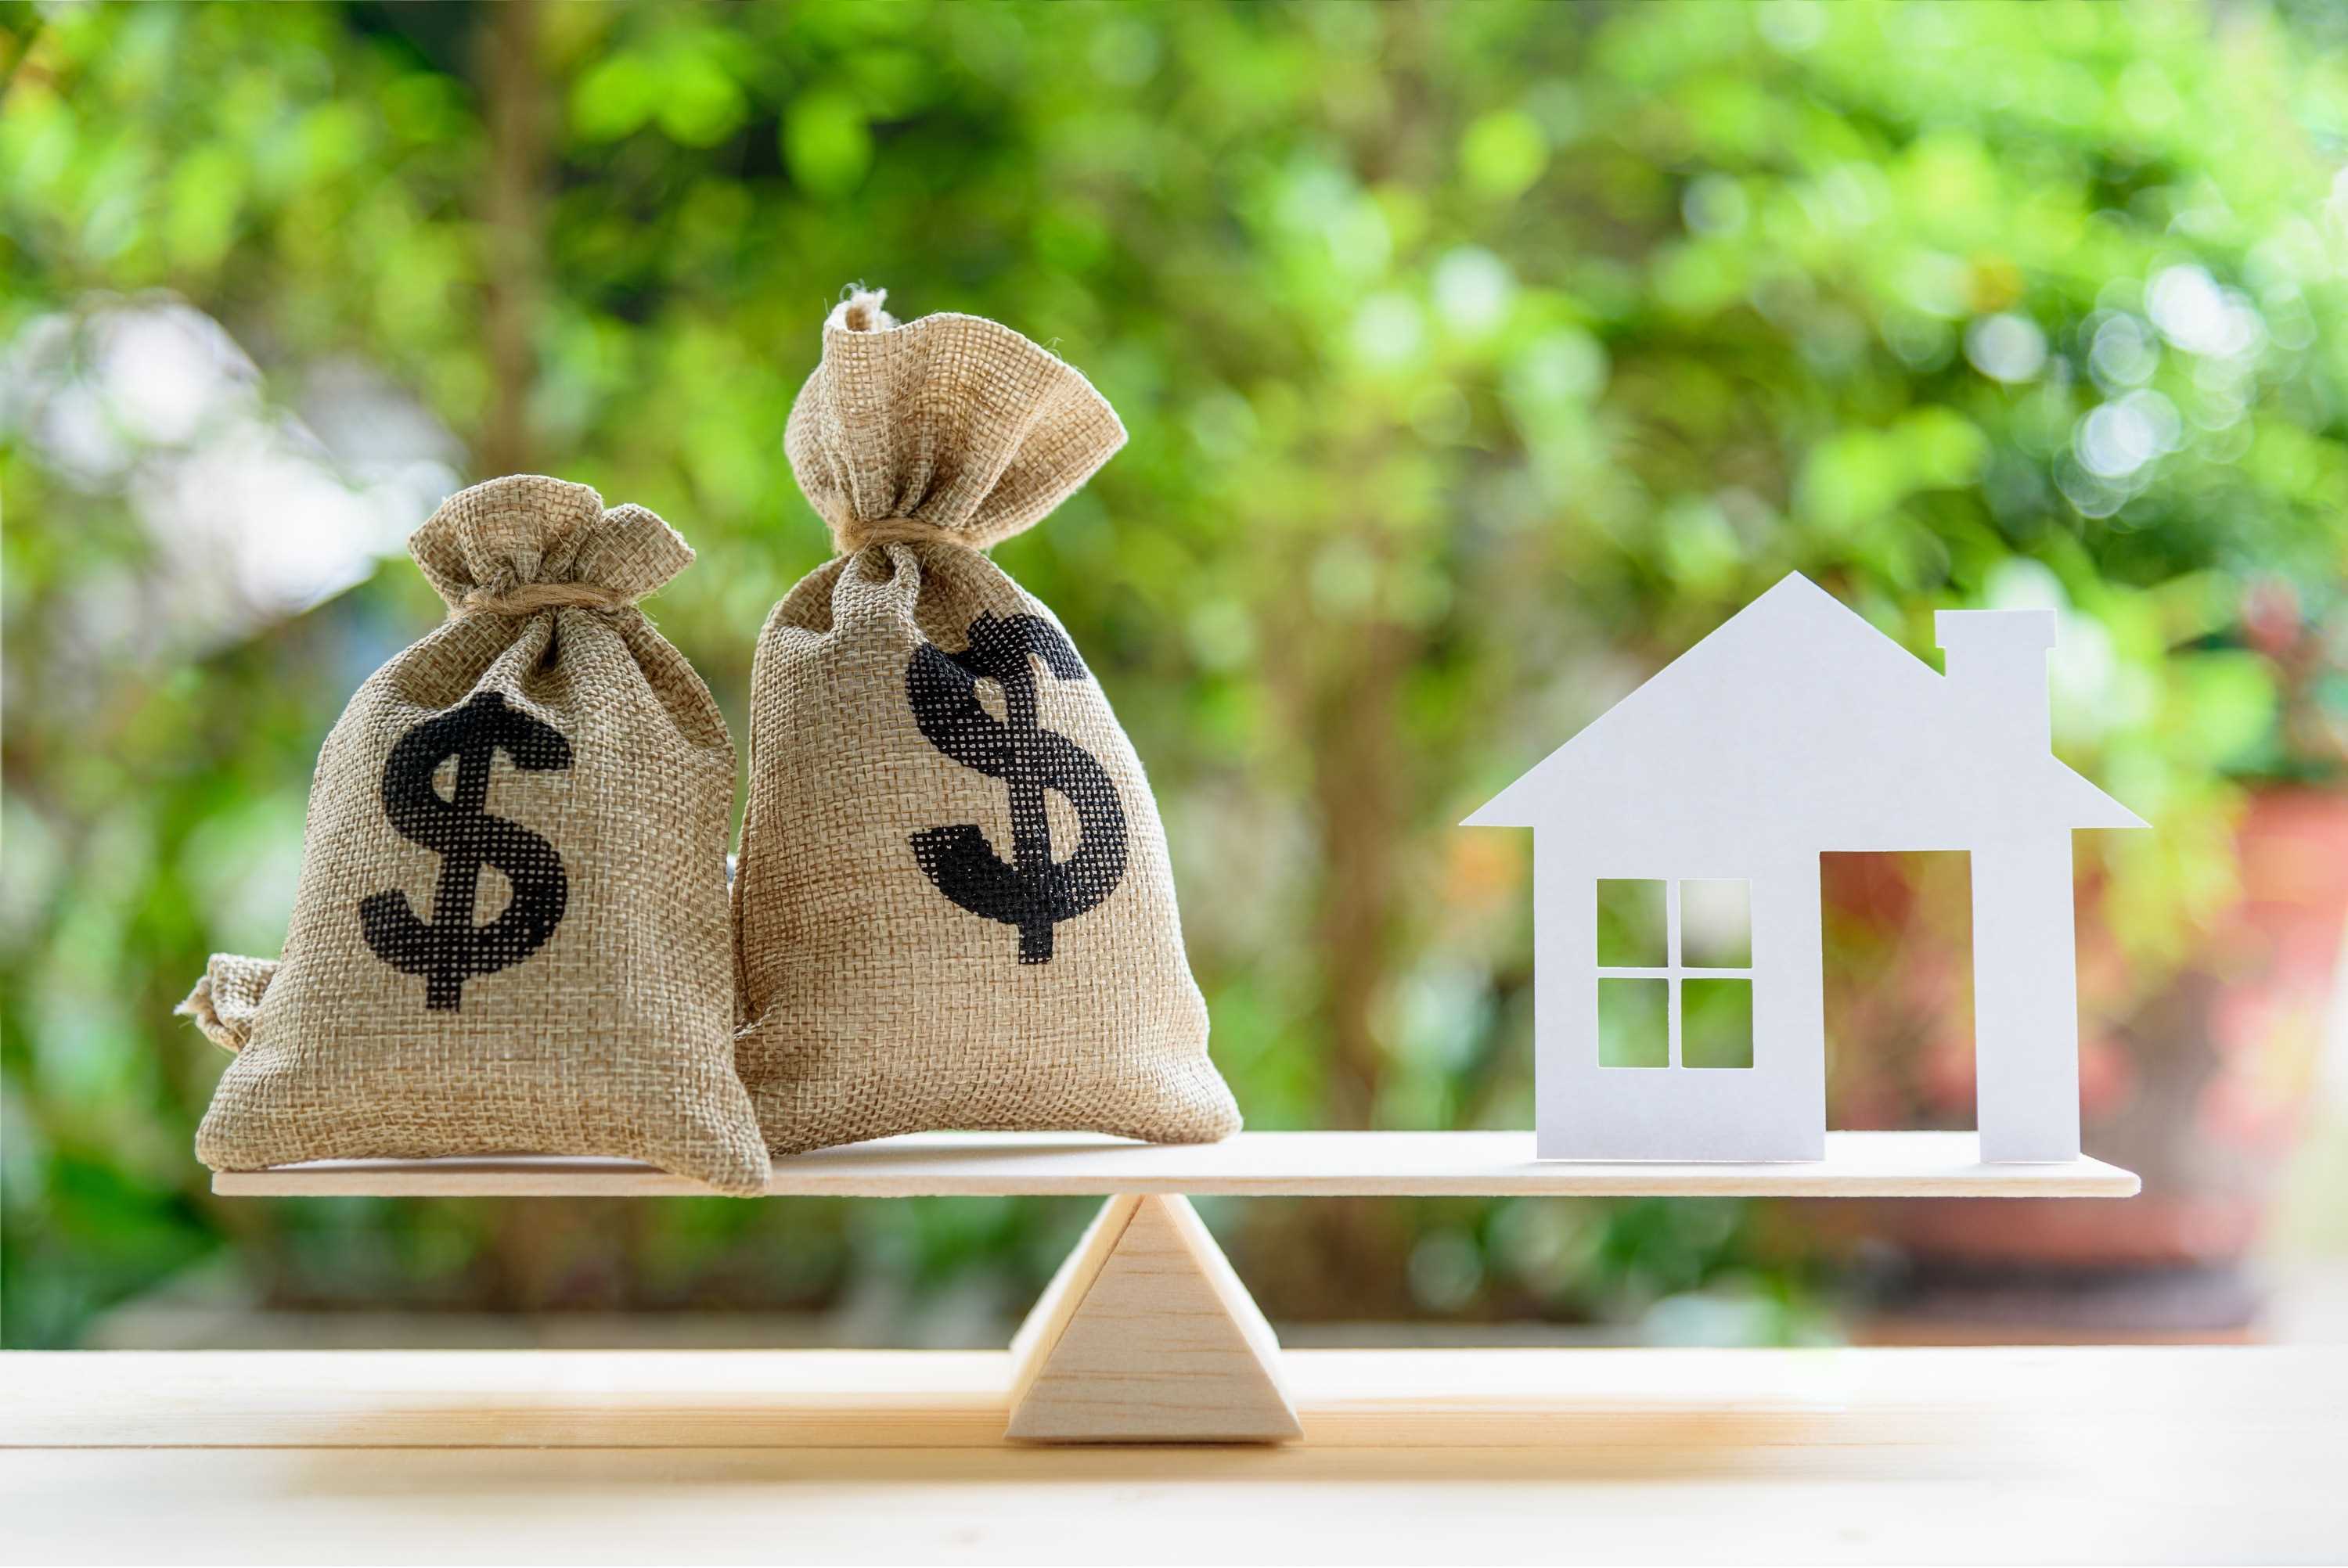 Homeownership, Mortgages and Leveraging Equity for Investments - You Could Be Missing Out? - May 14, 2020